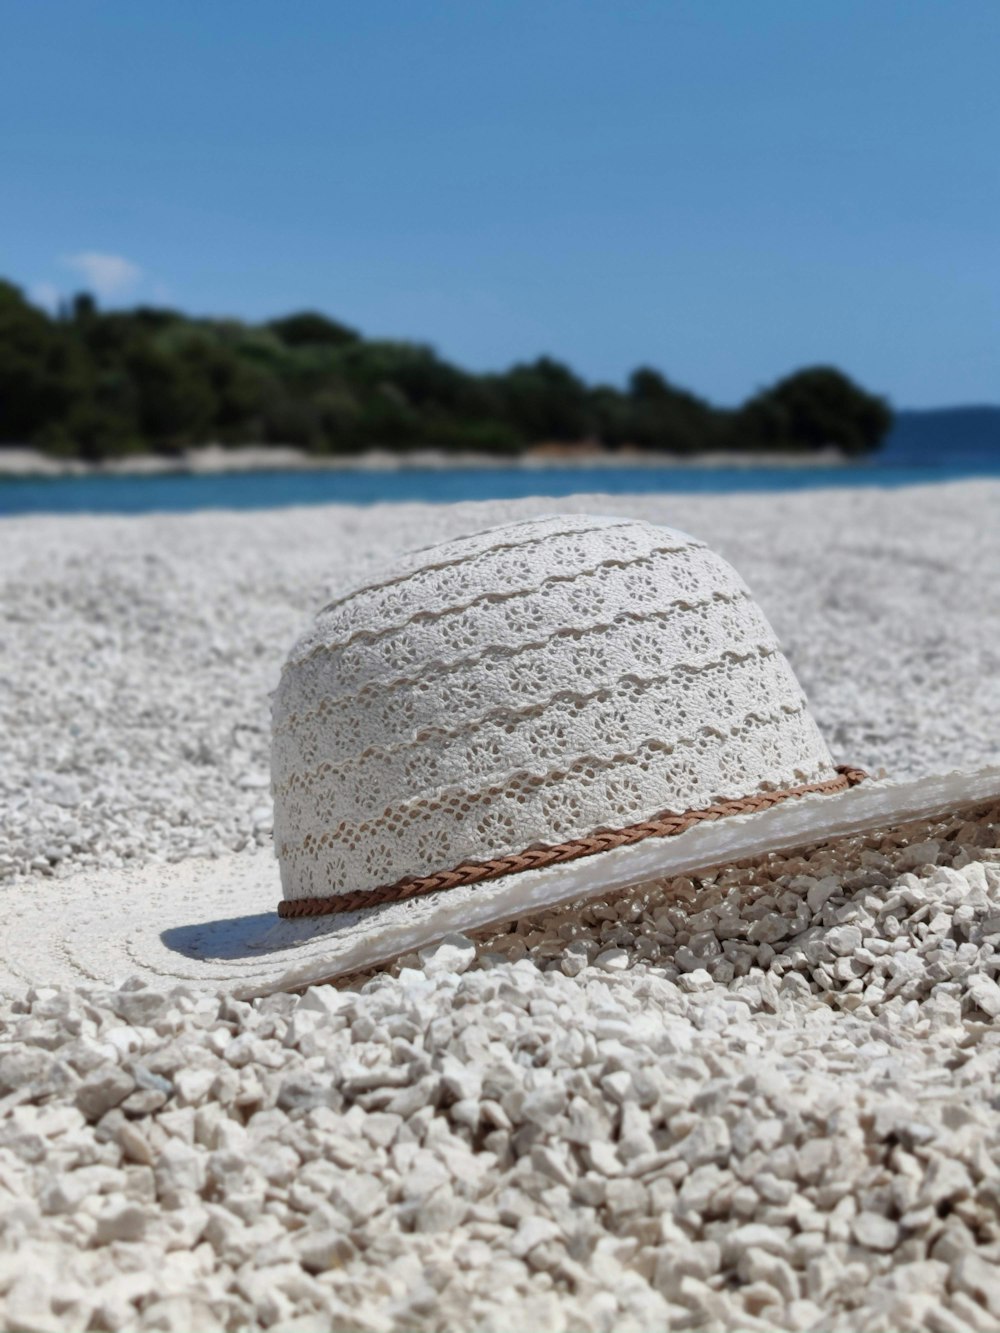 white and blue sun hat on white sand beach during daytime